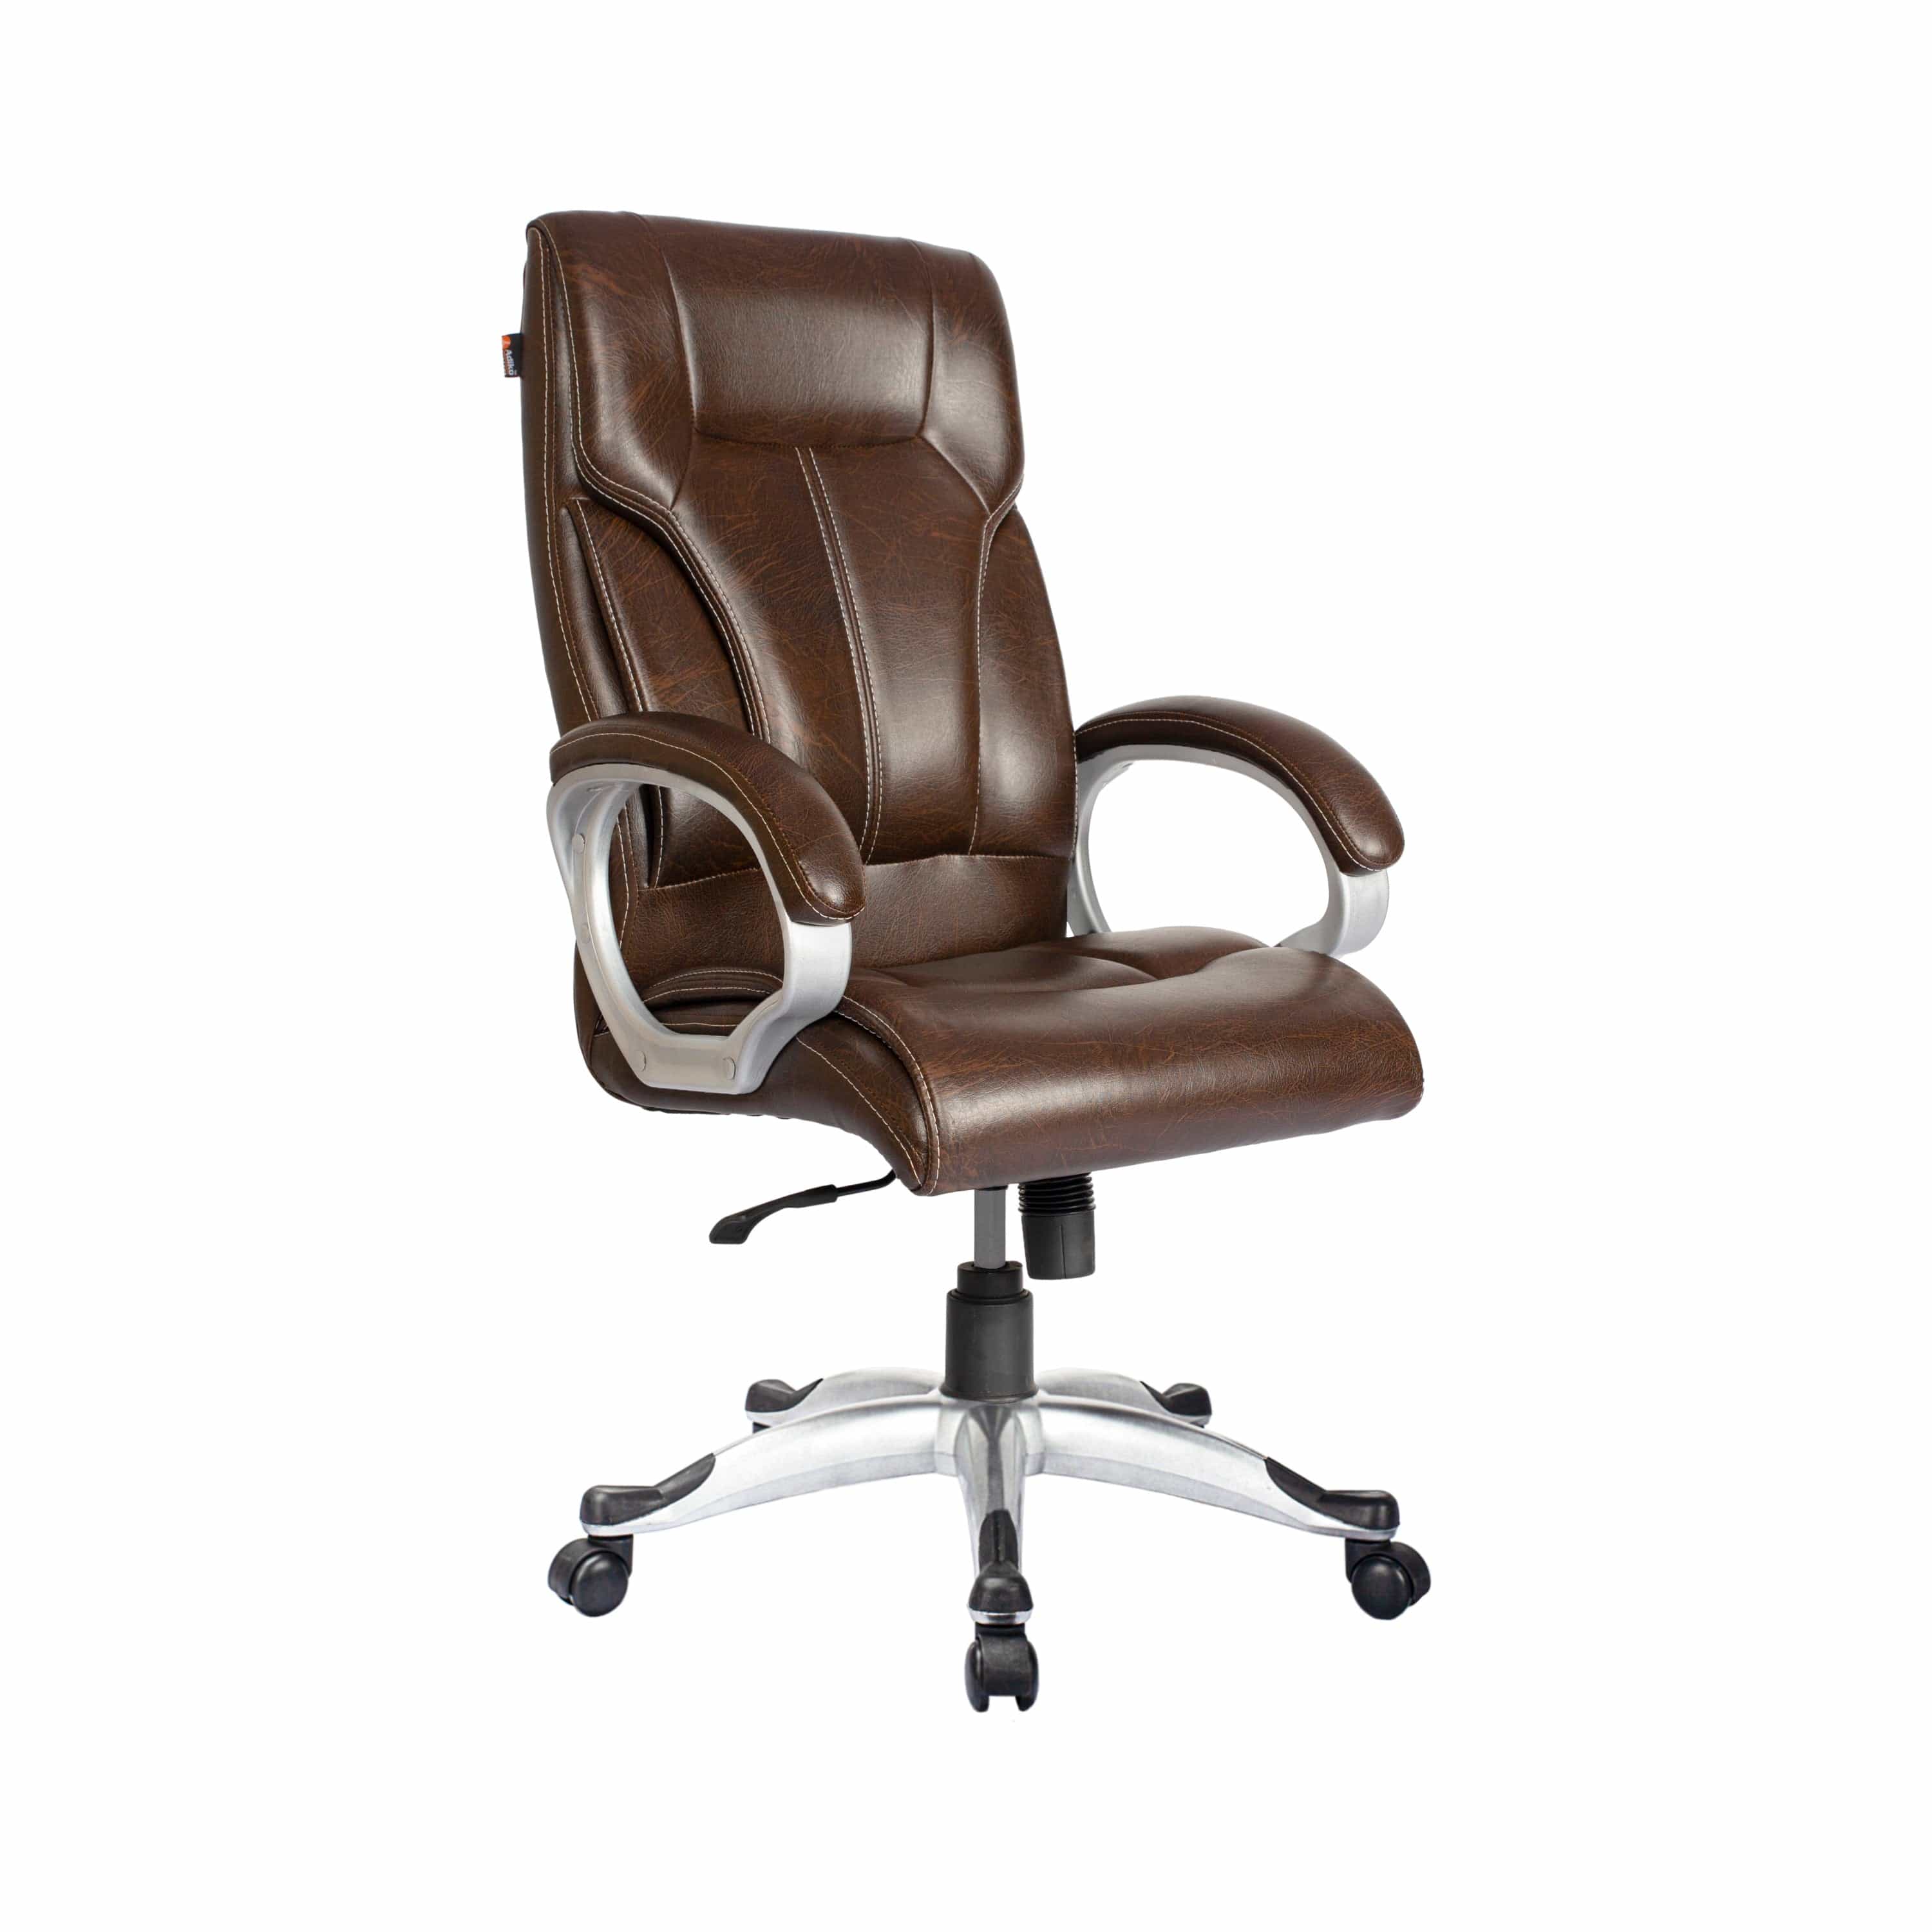 Adiko High Back Executive Revolving Office Chair in Brown